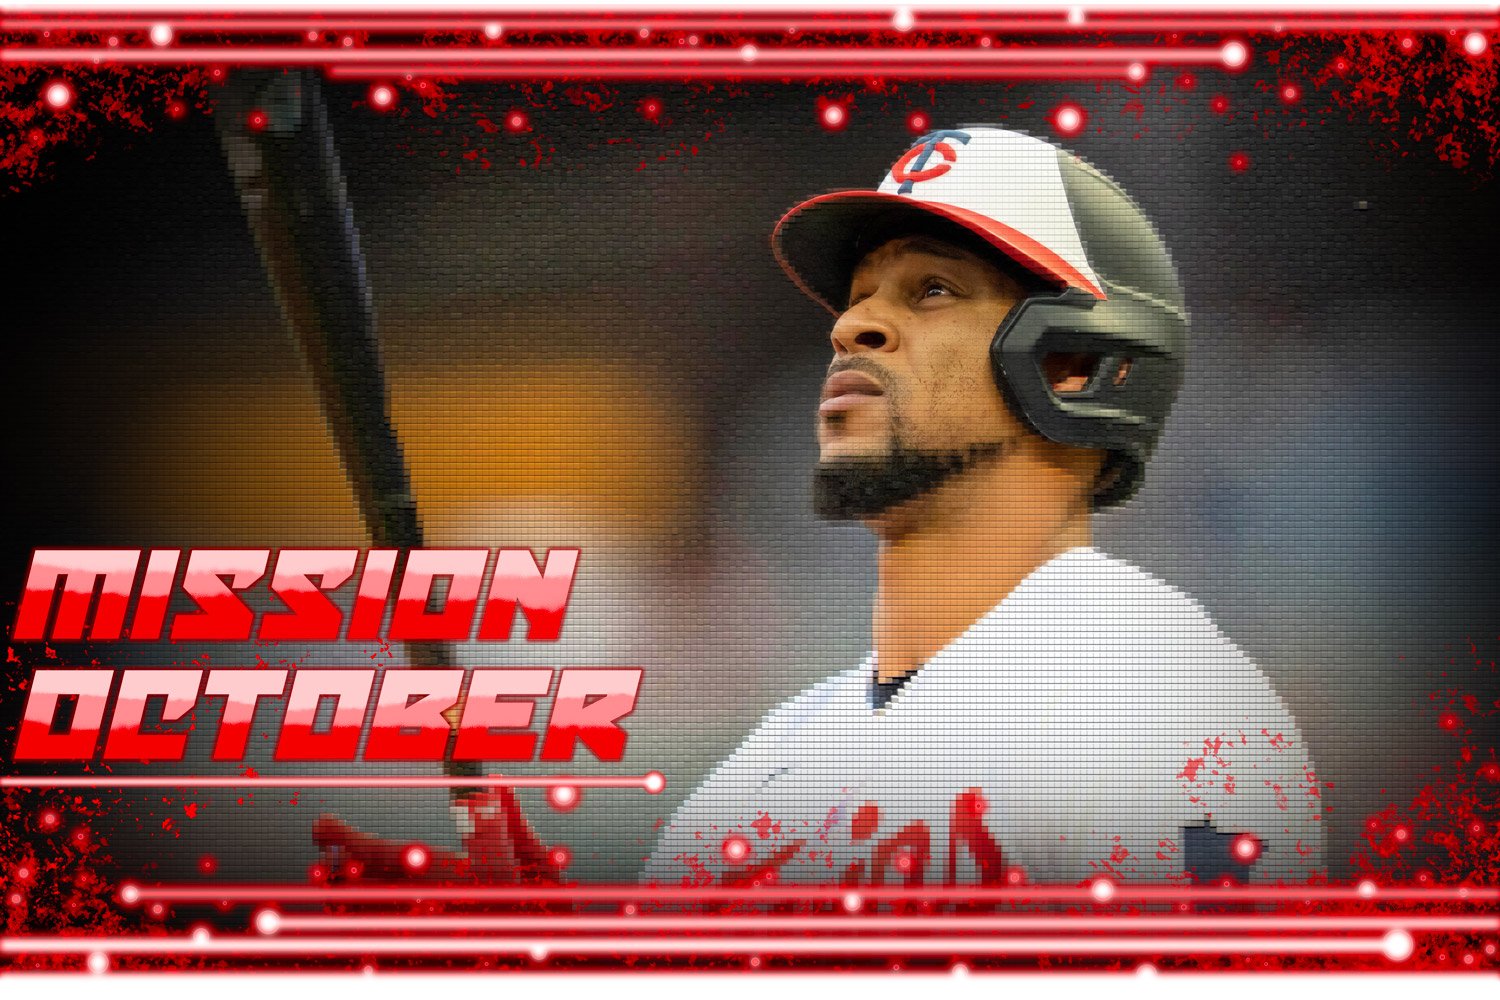 Buxton lays out, Byron Buxton is FEARLESS., By MLB